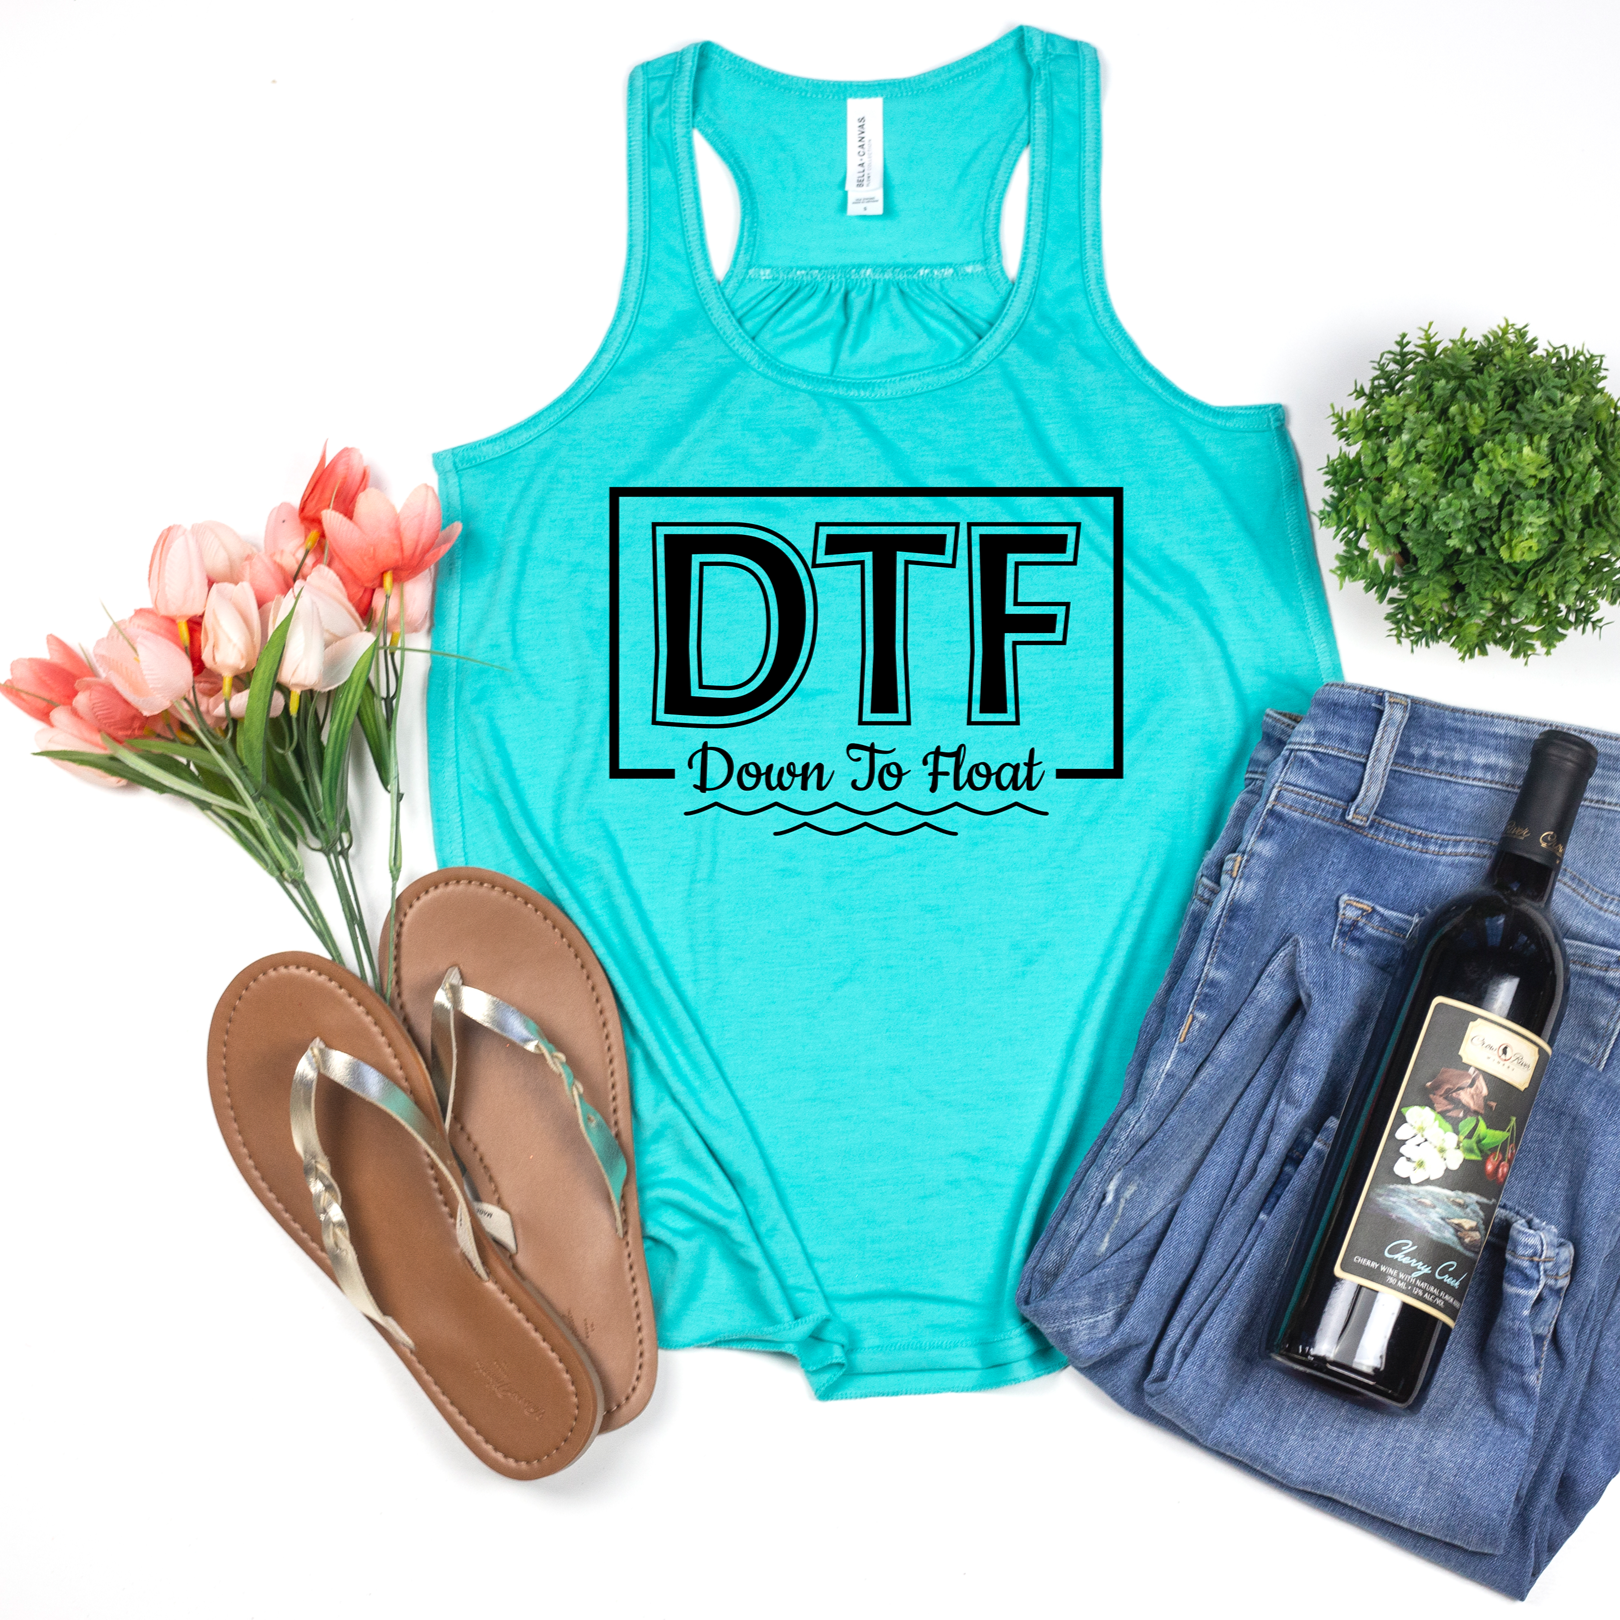 DTF Down to Float Tee or Tank